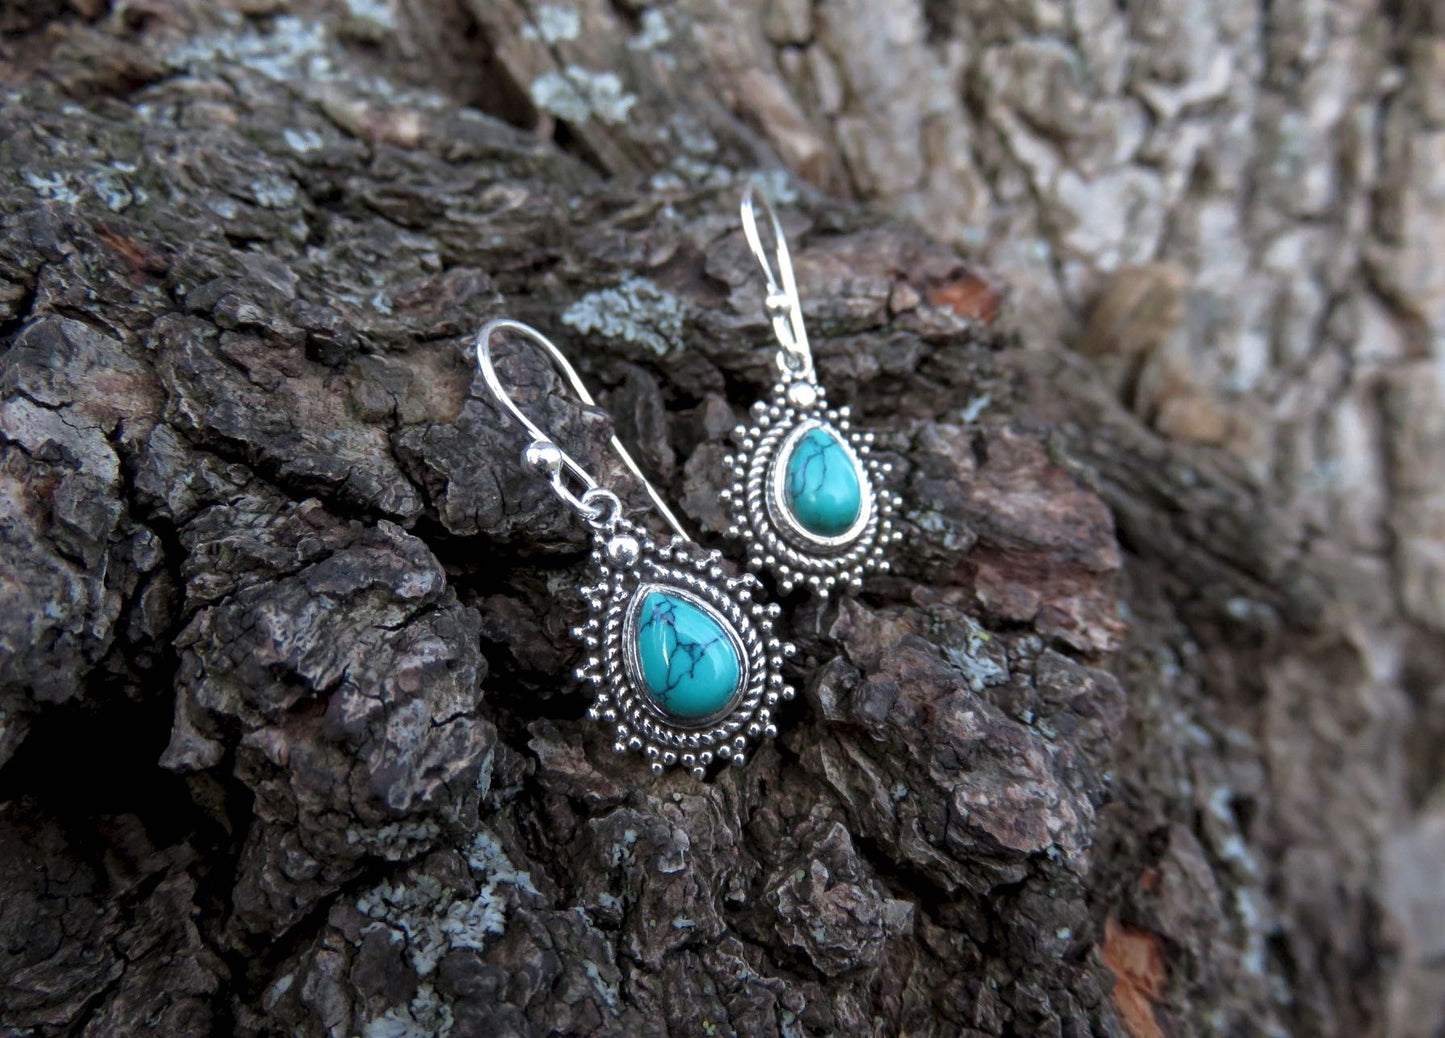 small earrings made of silver with a drop-shaped stone 